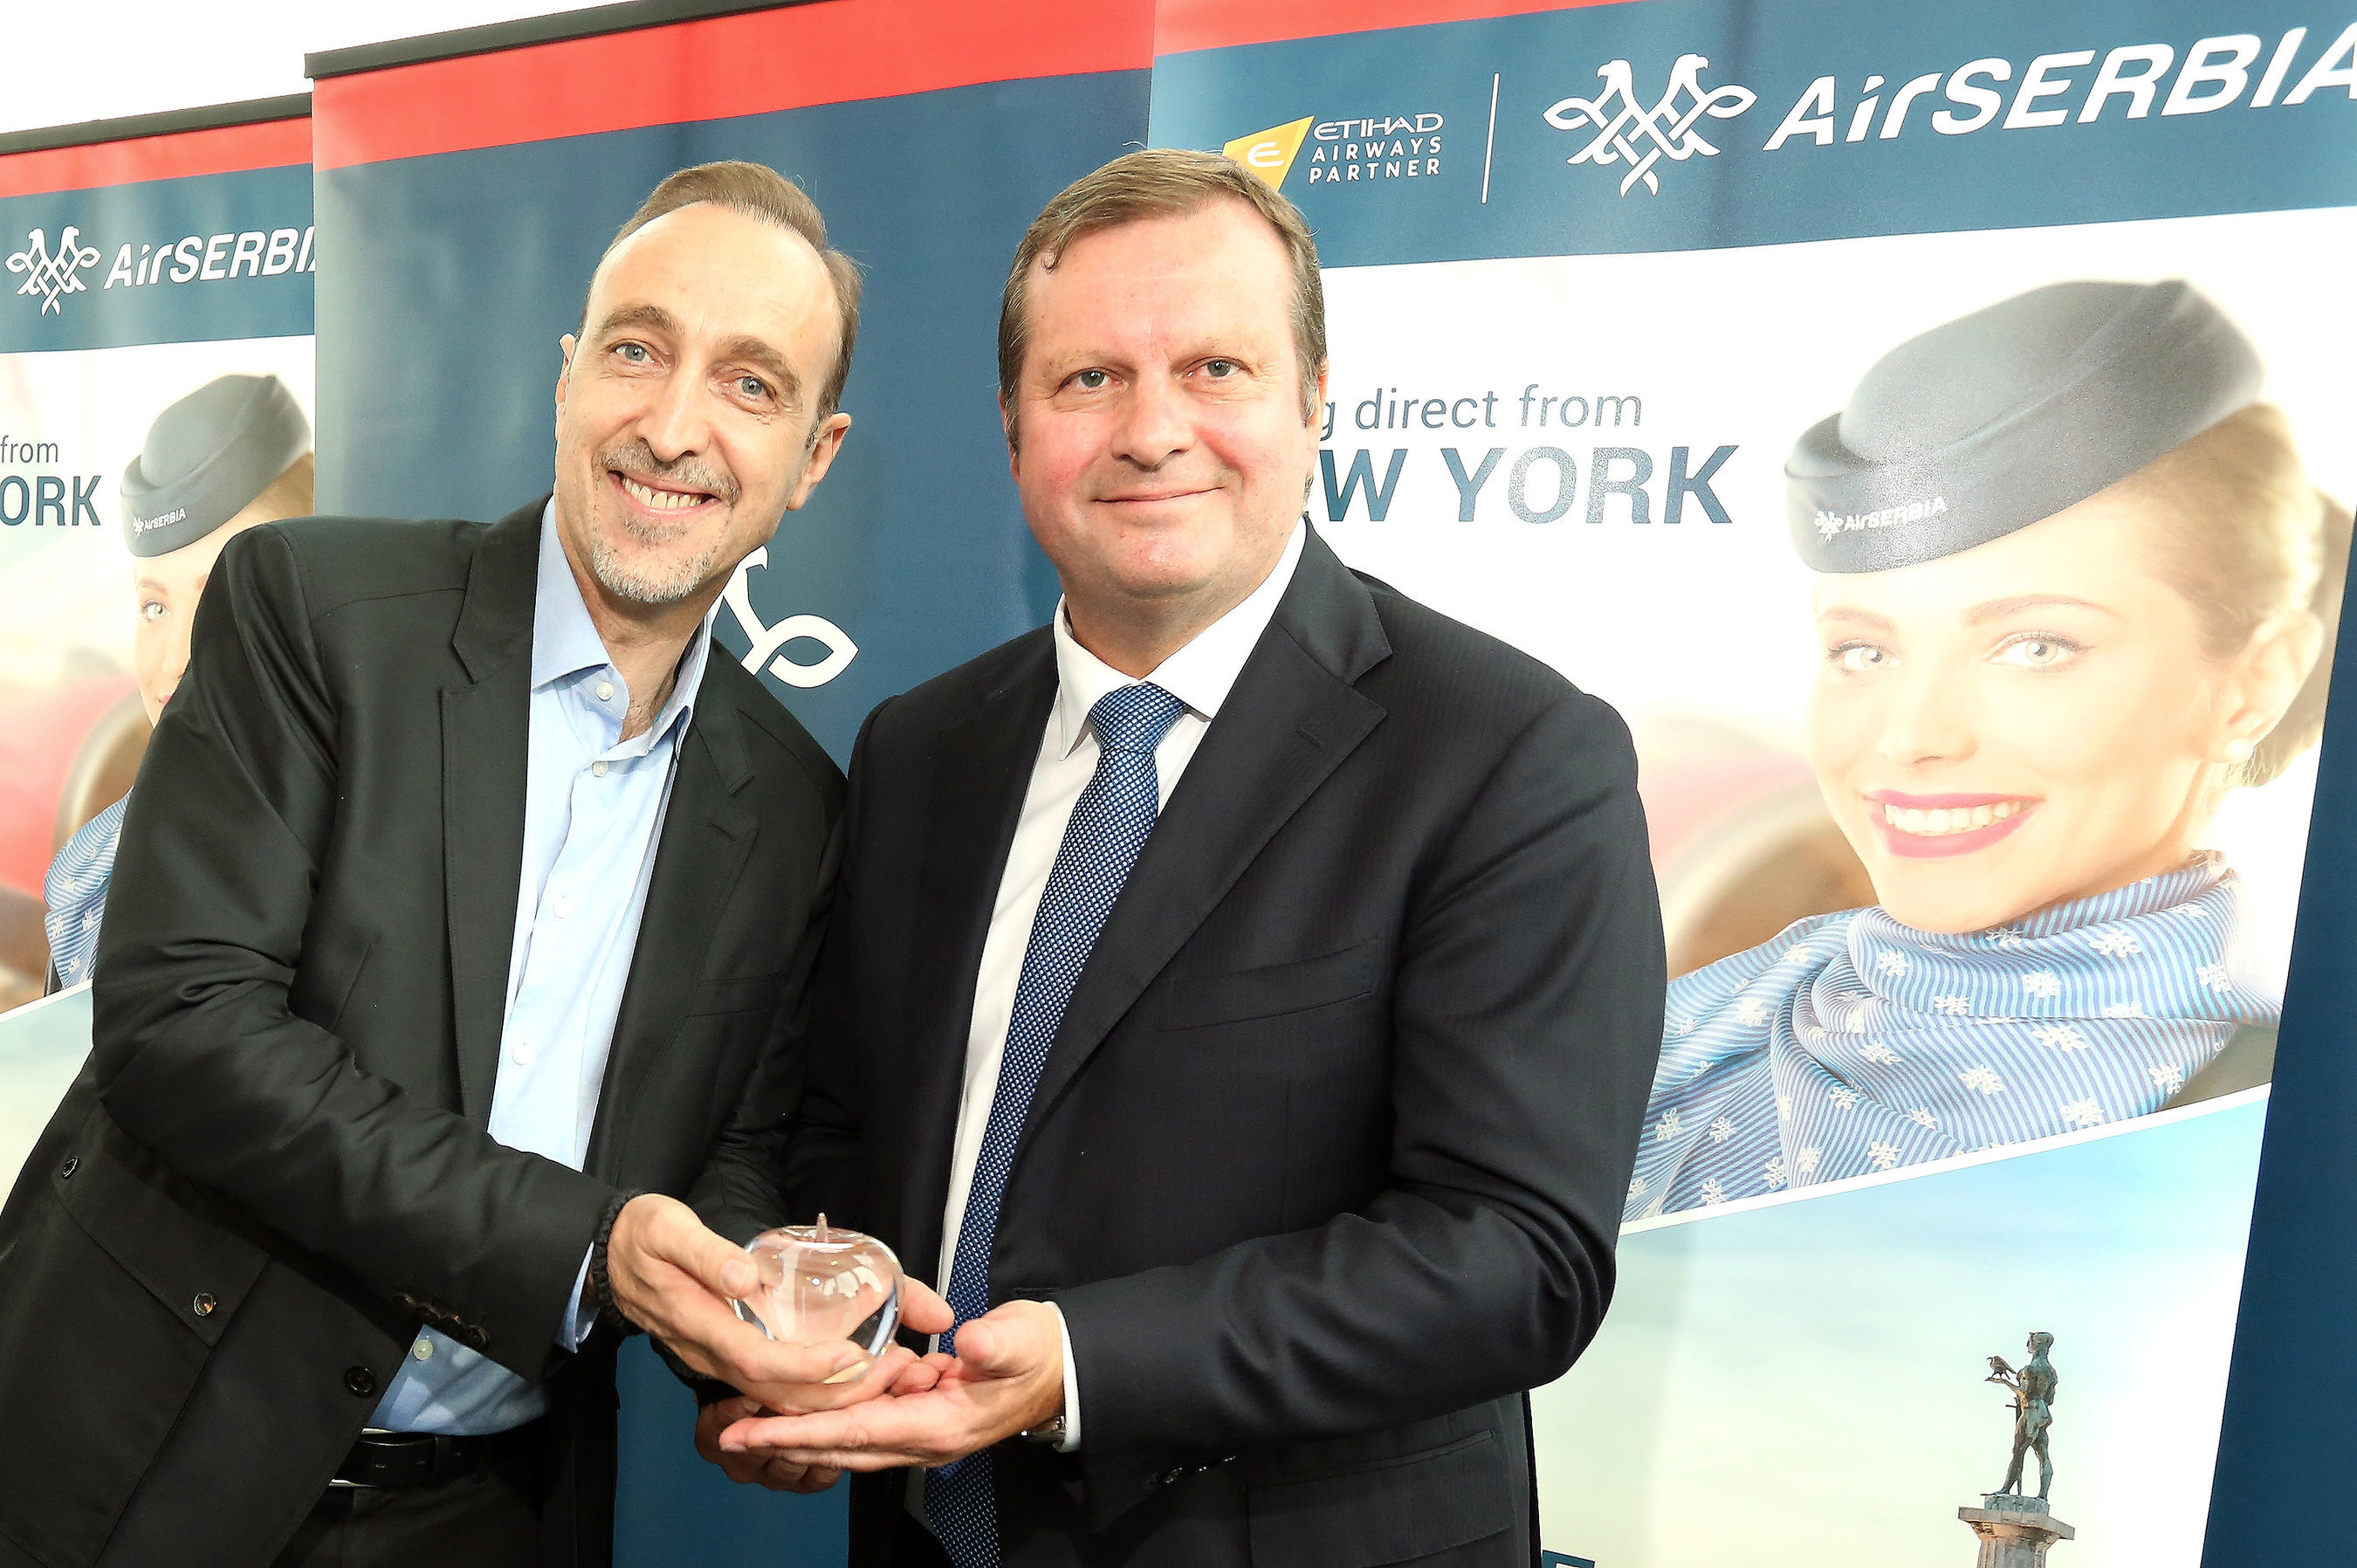 Gert-Jan de Graaf, President and Chief Executive Officer of JFK IAT, LLC presents Dane Kondić, Chief Executive Officer of Air Serbia with a commemorative glass apple to celebrate the start of Air Serbia's non-stop service from Belgrade to New York.